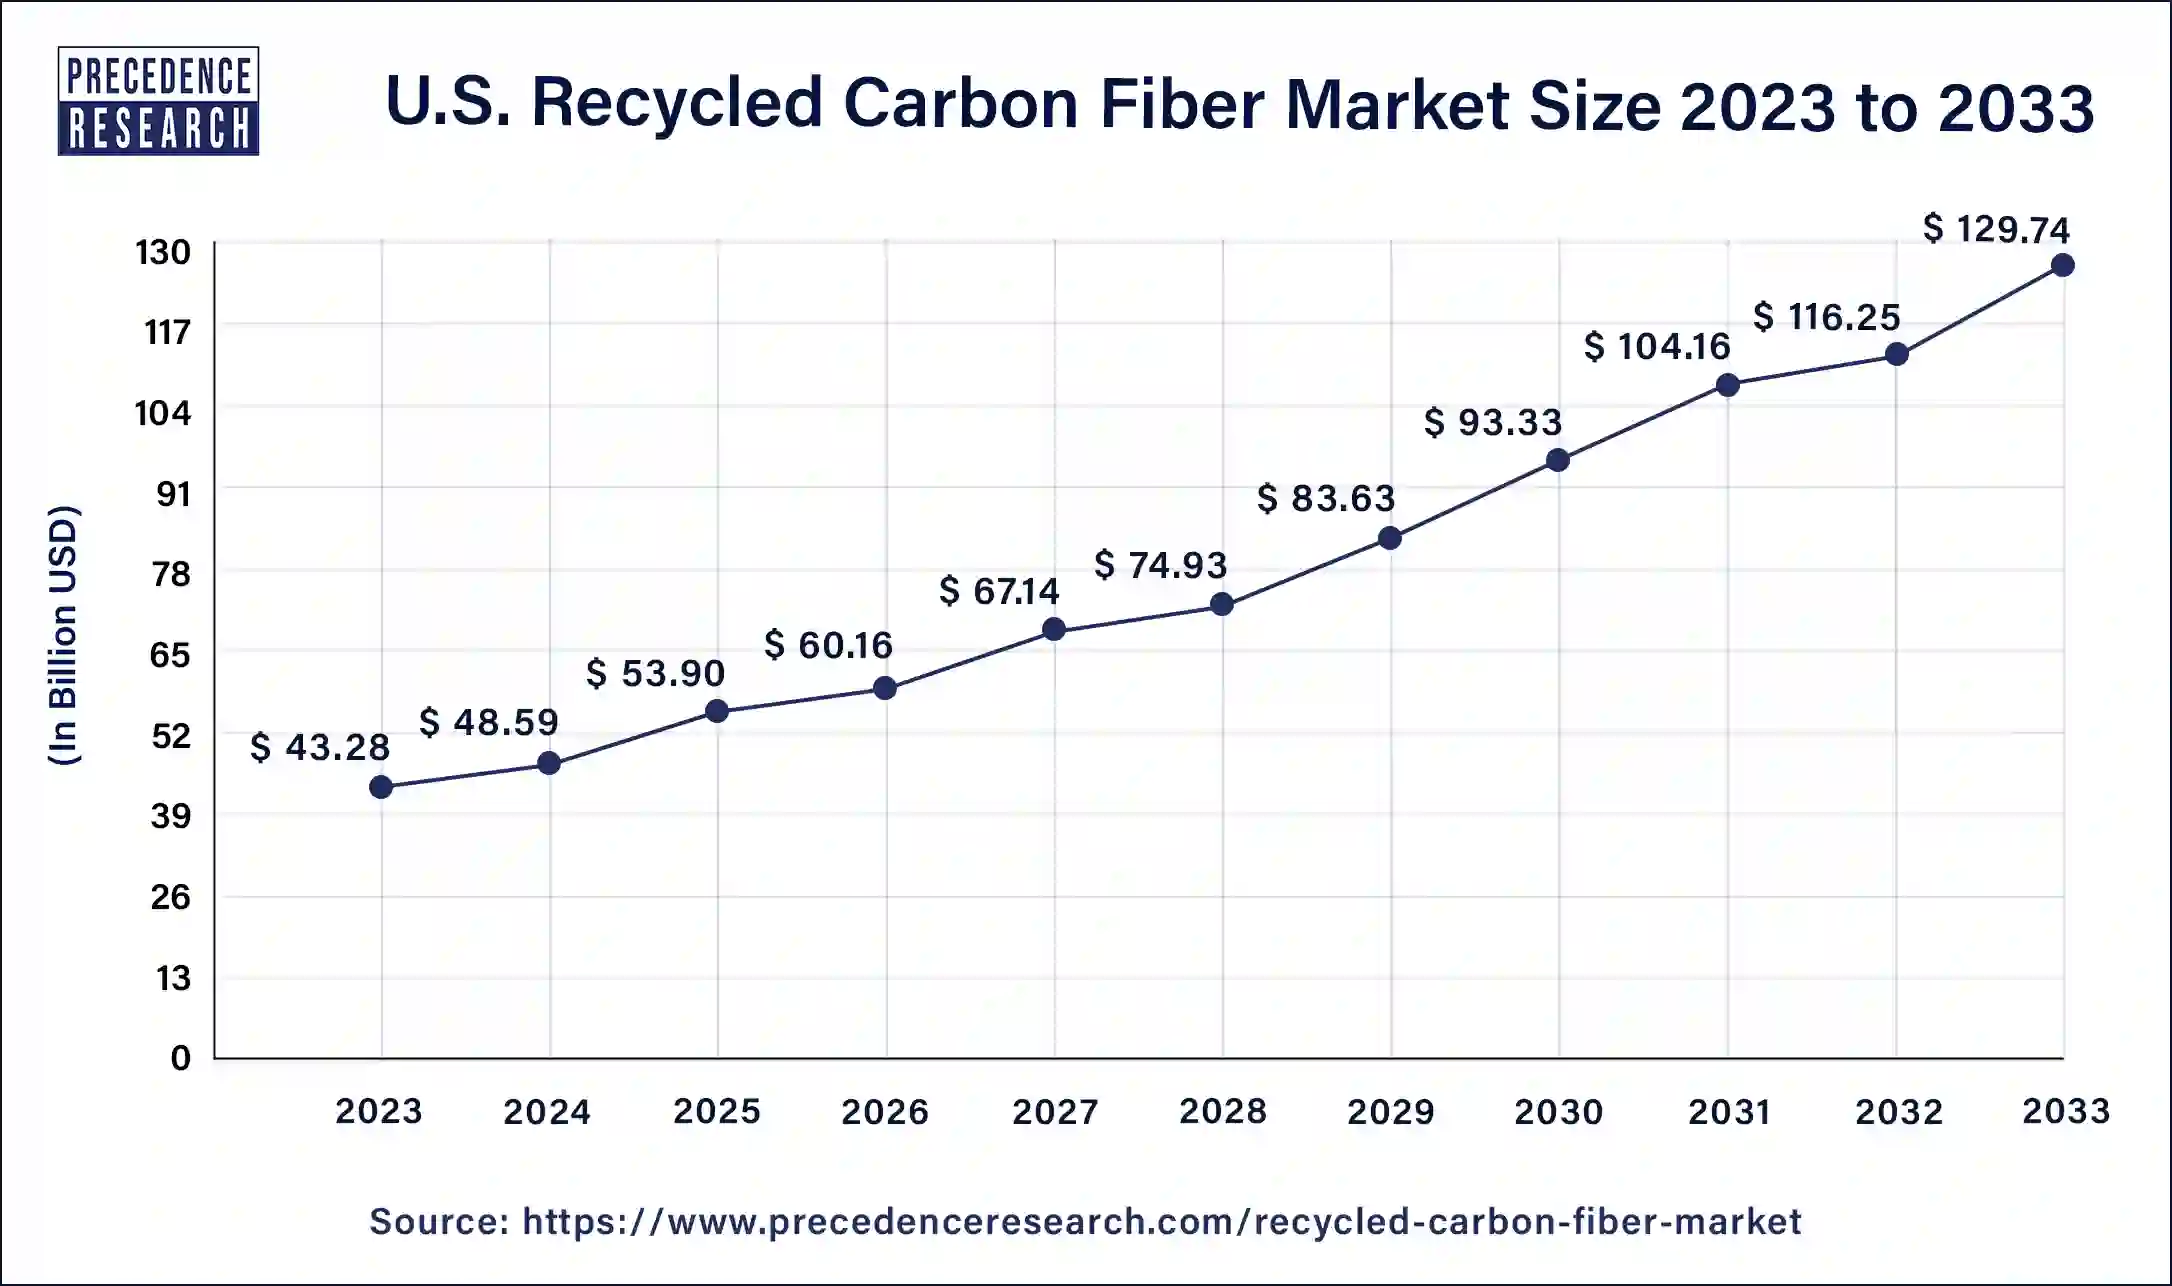 U.S. Recycled Carbon Fiber Market Size 2024 to 2033